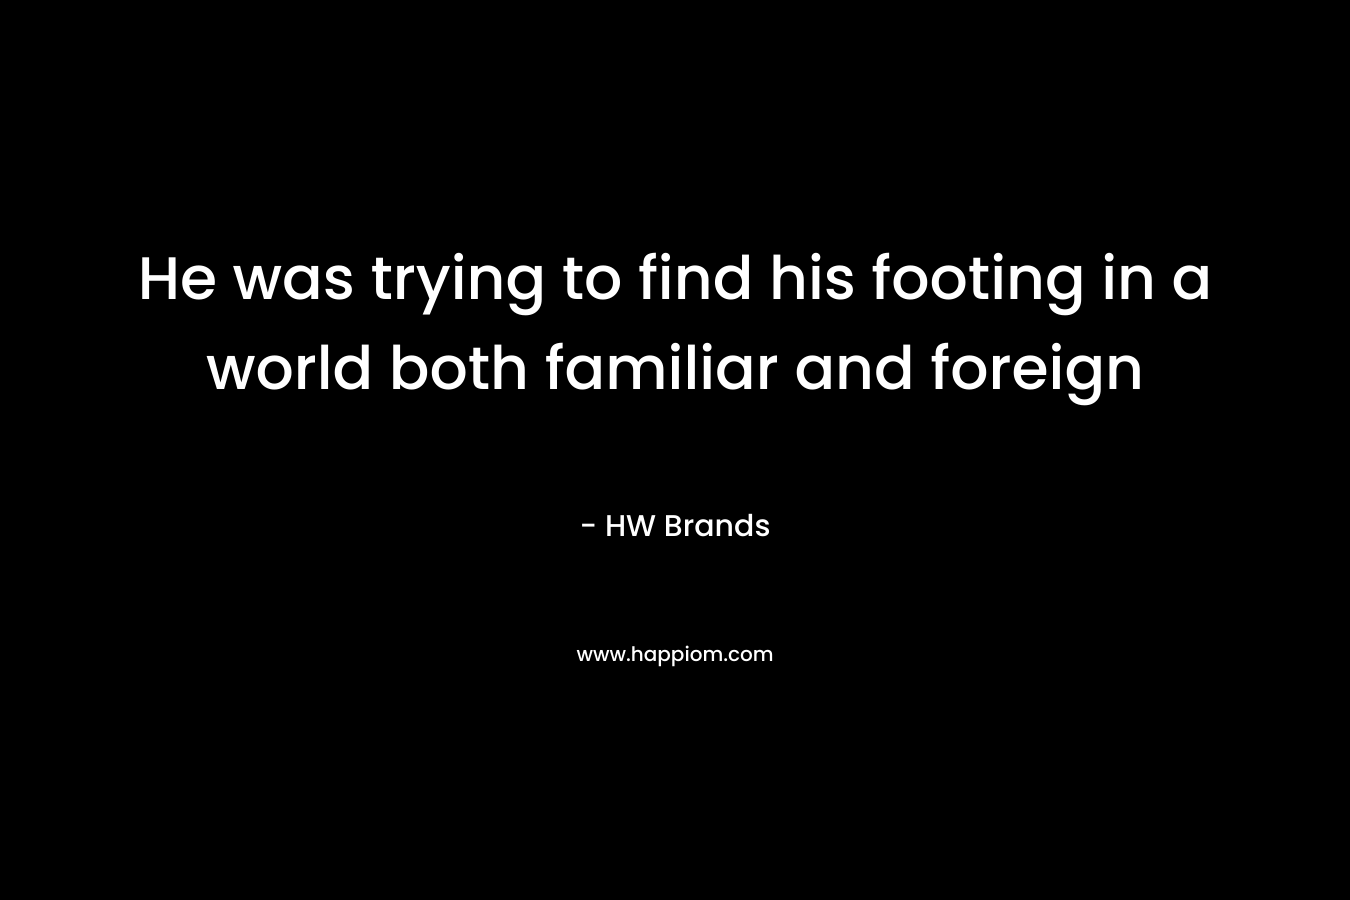 He was trying to find his footing in a world both familiar and foreign